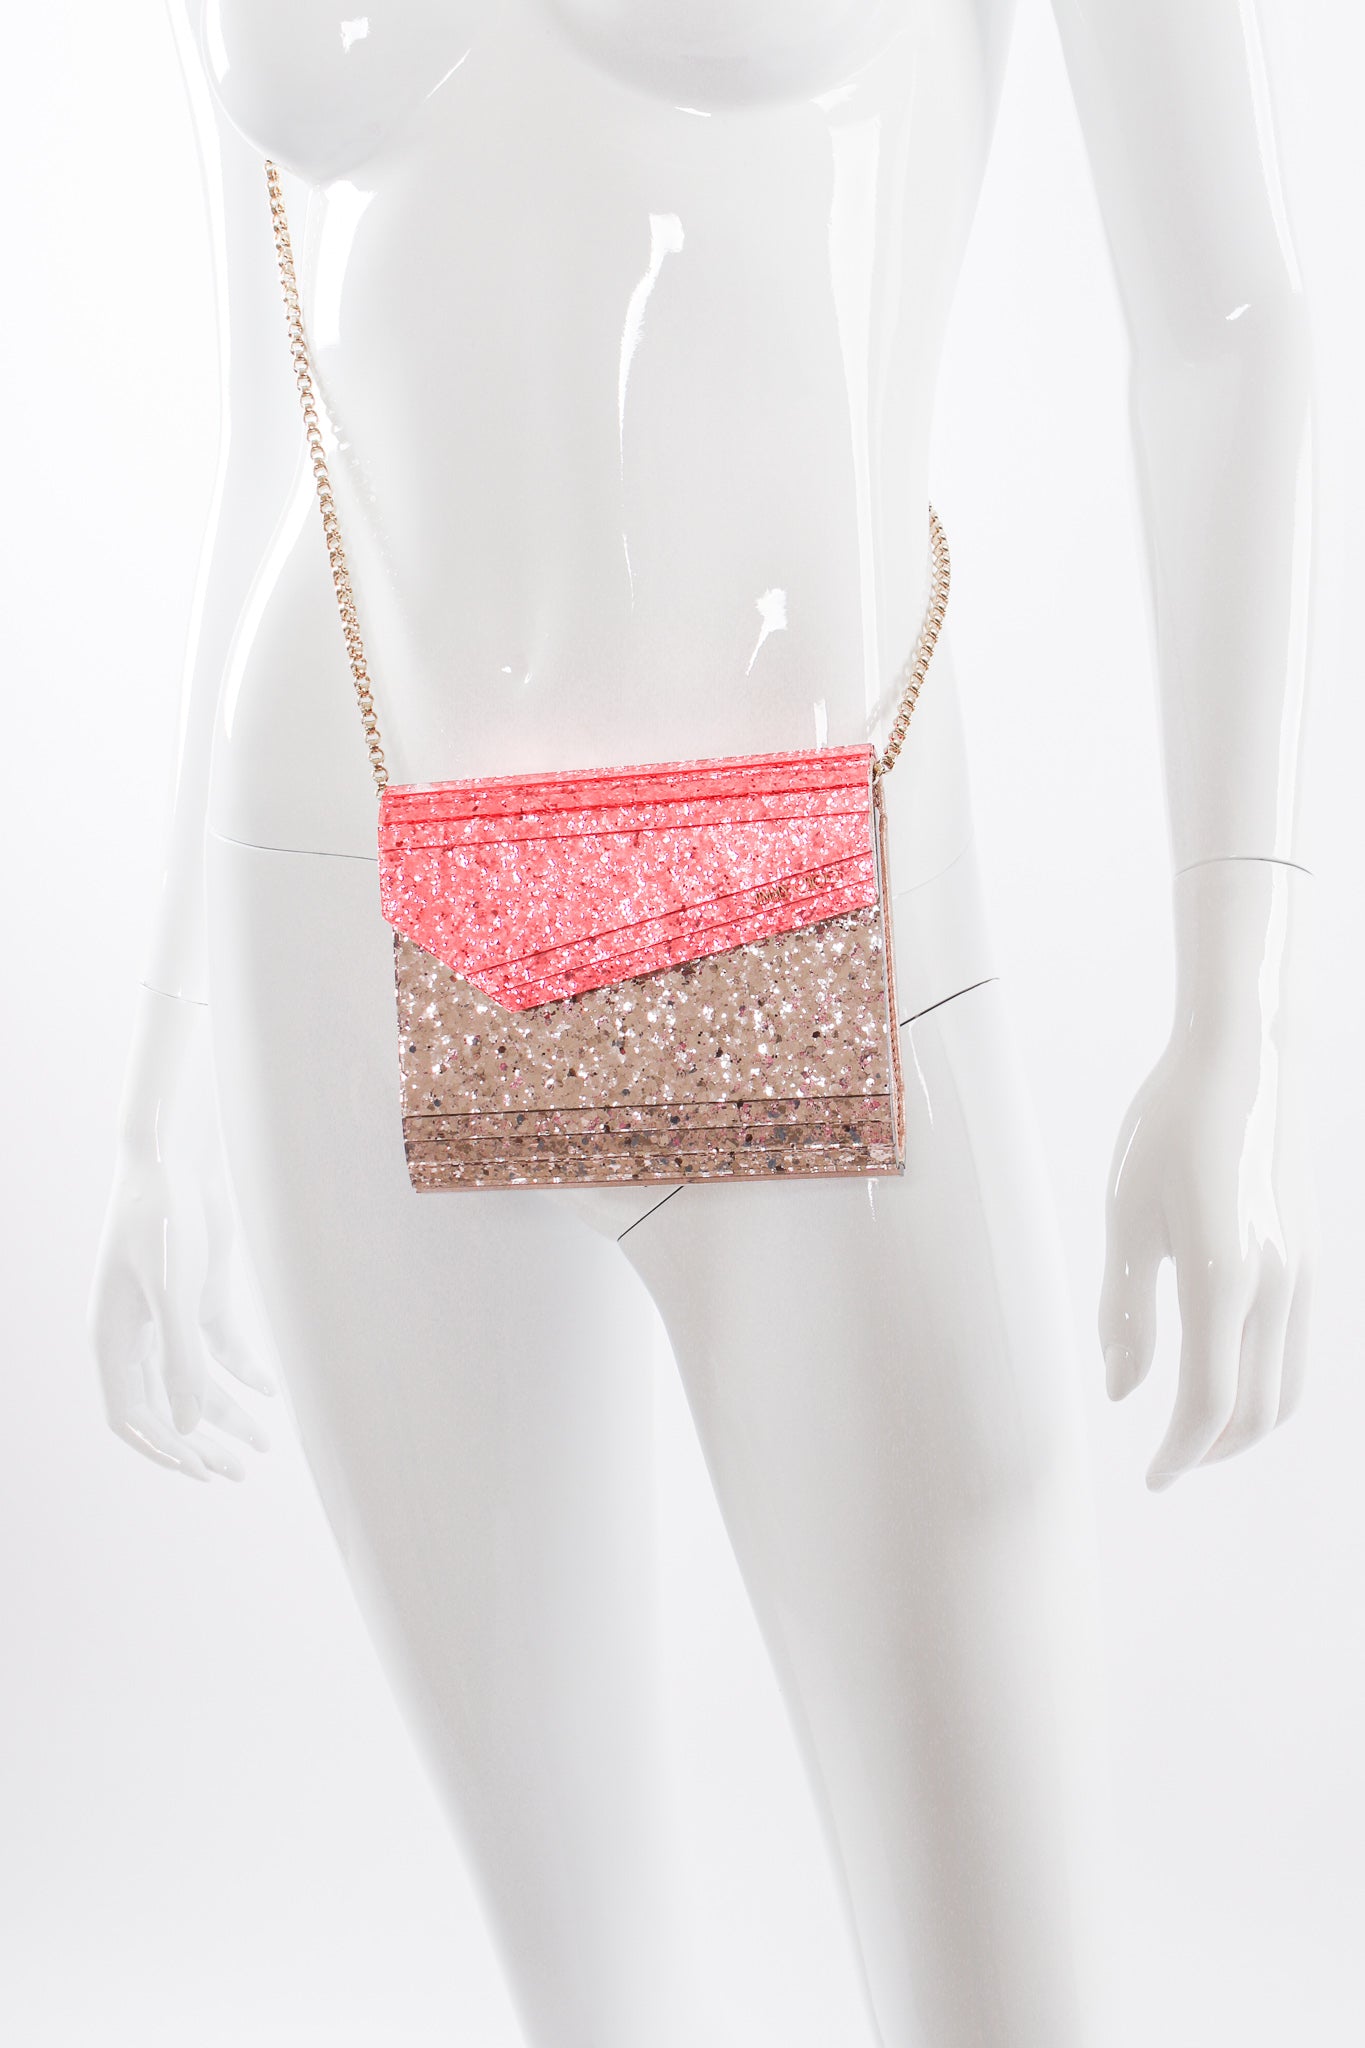 Jimmy Choo Two-Tone Acrylic Glitter Clutch Bag on mannequin at Recess Los Angeles